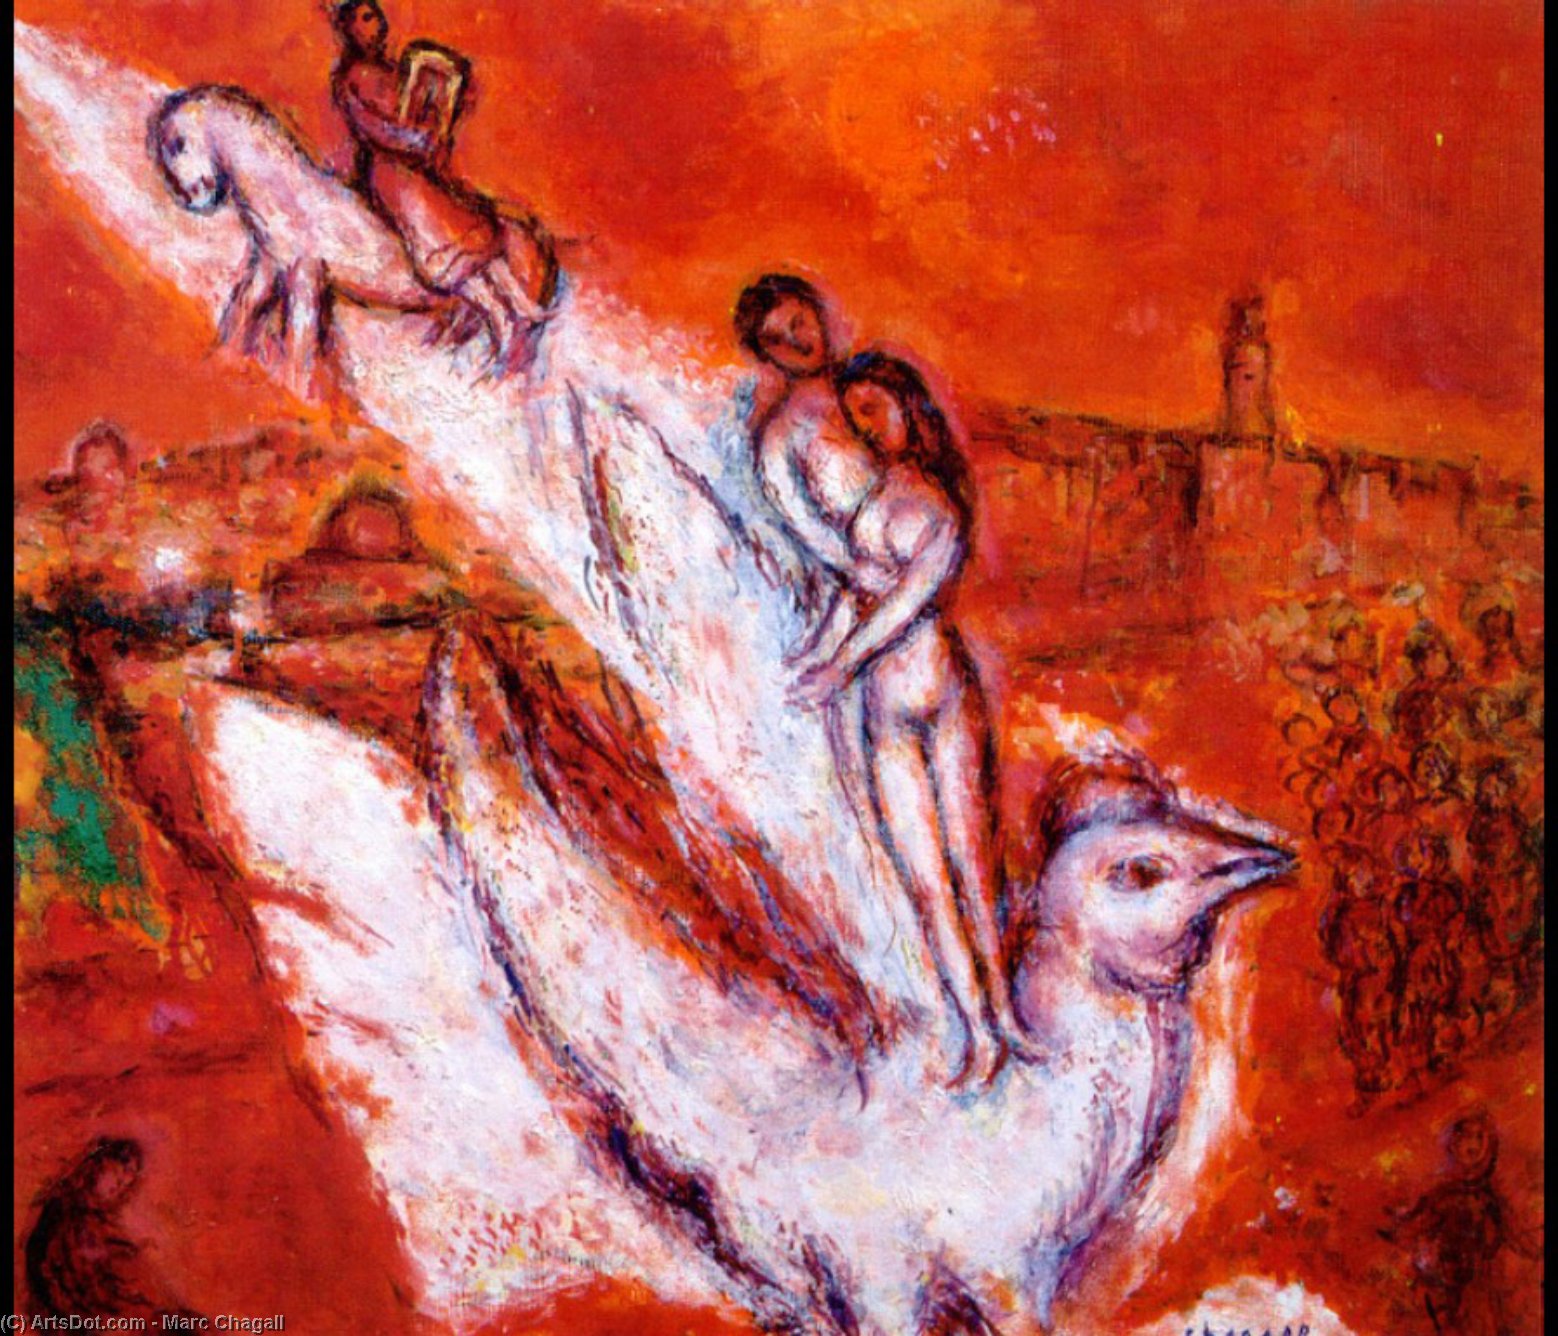 WikiOO.org - 백과 사전 - 회화, 삽화 Marc Chagall - Song of Songs